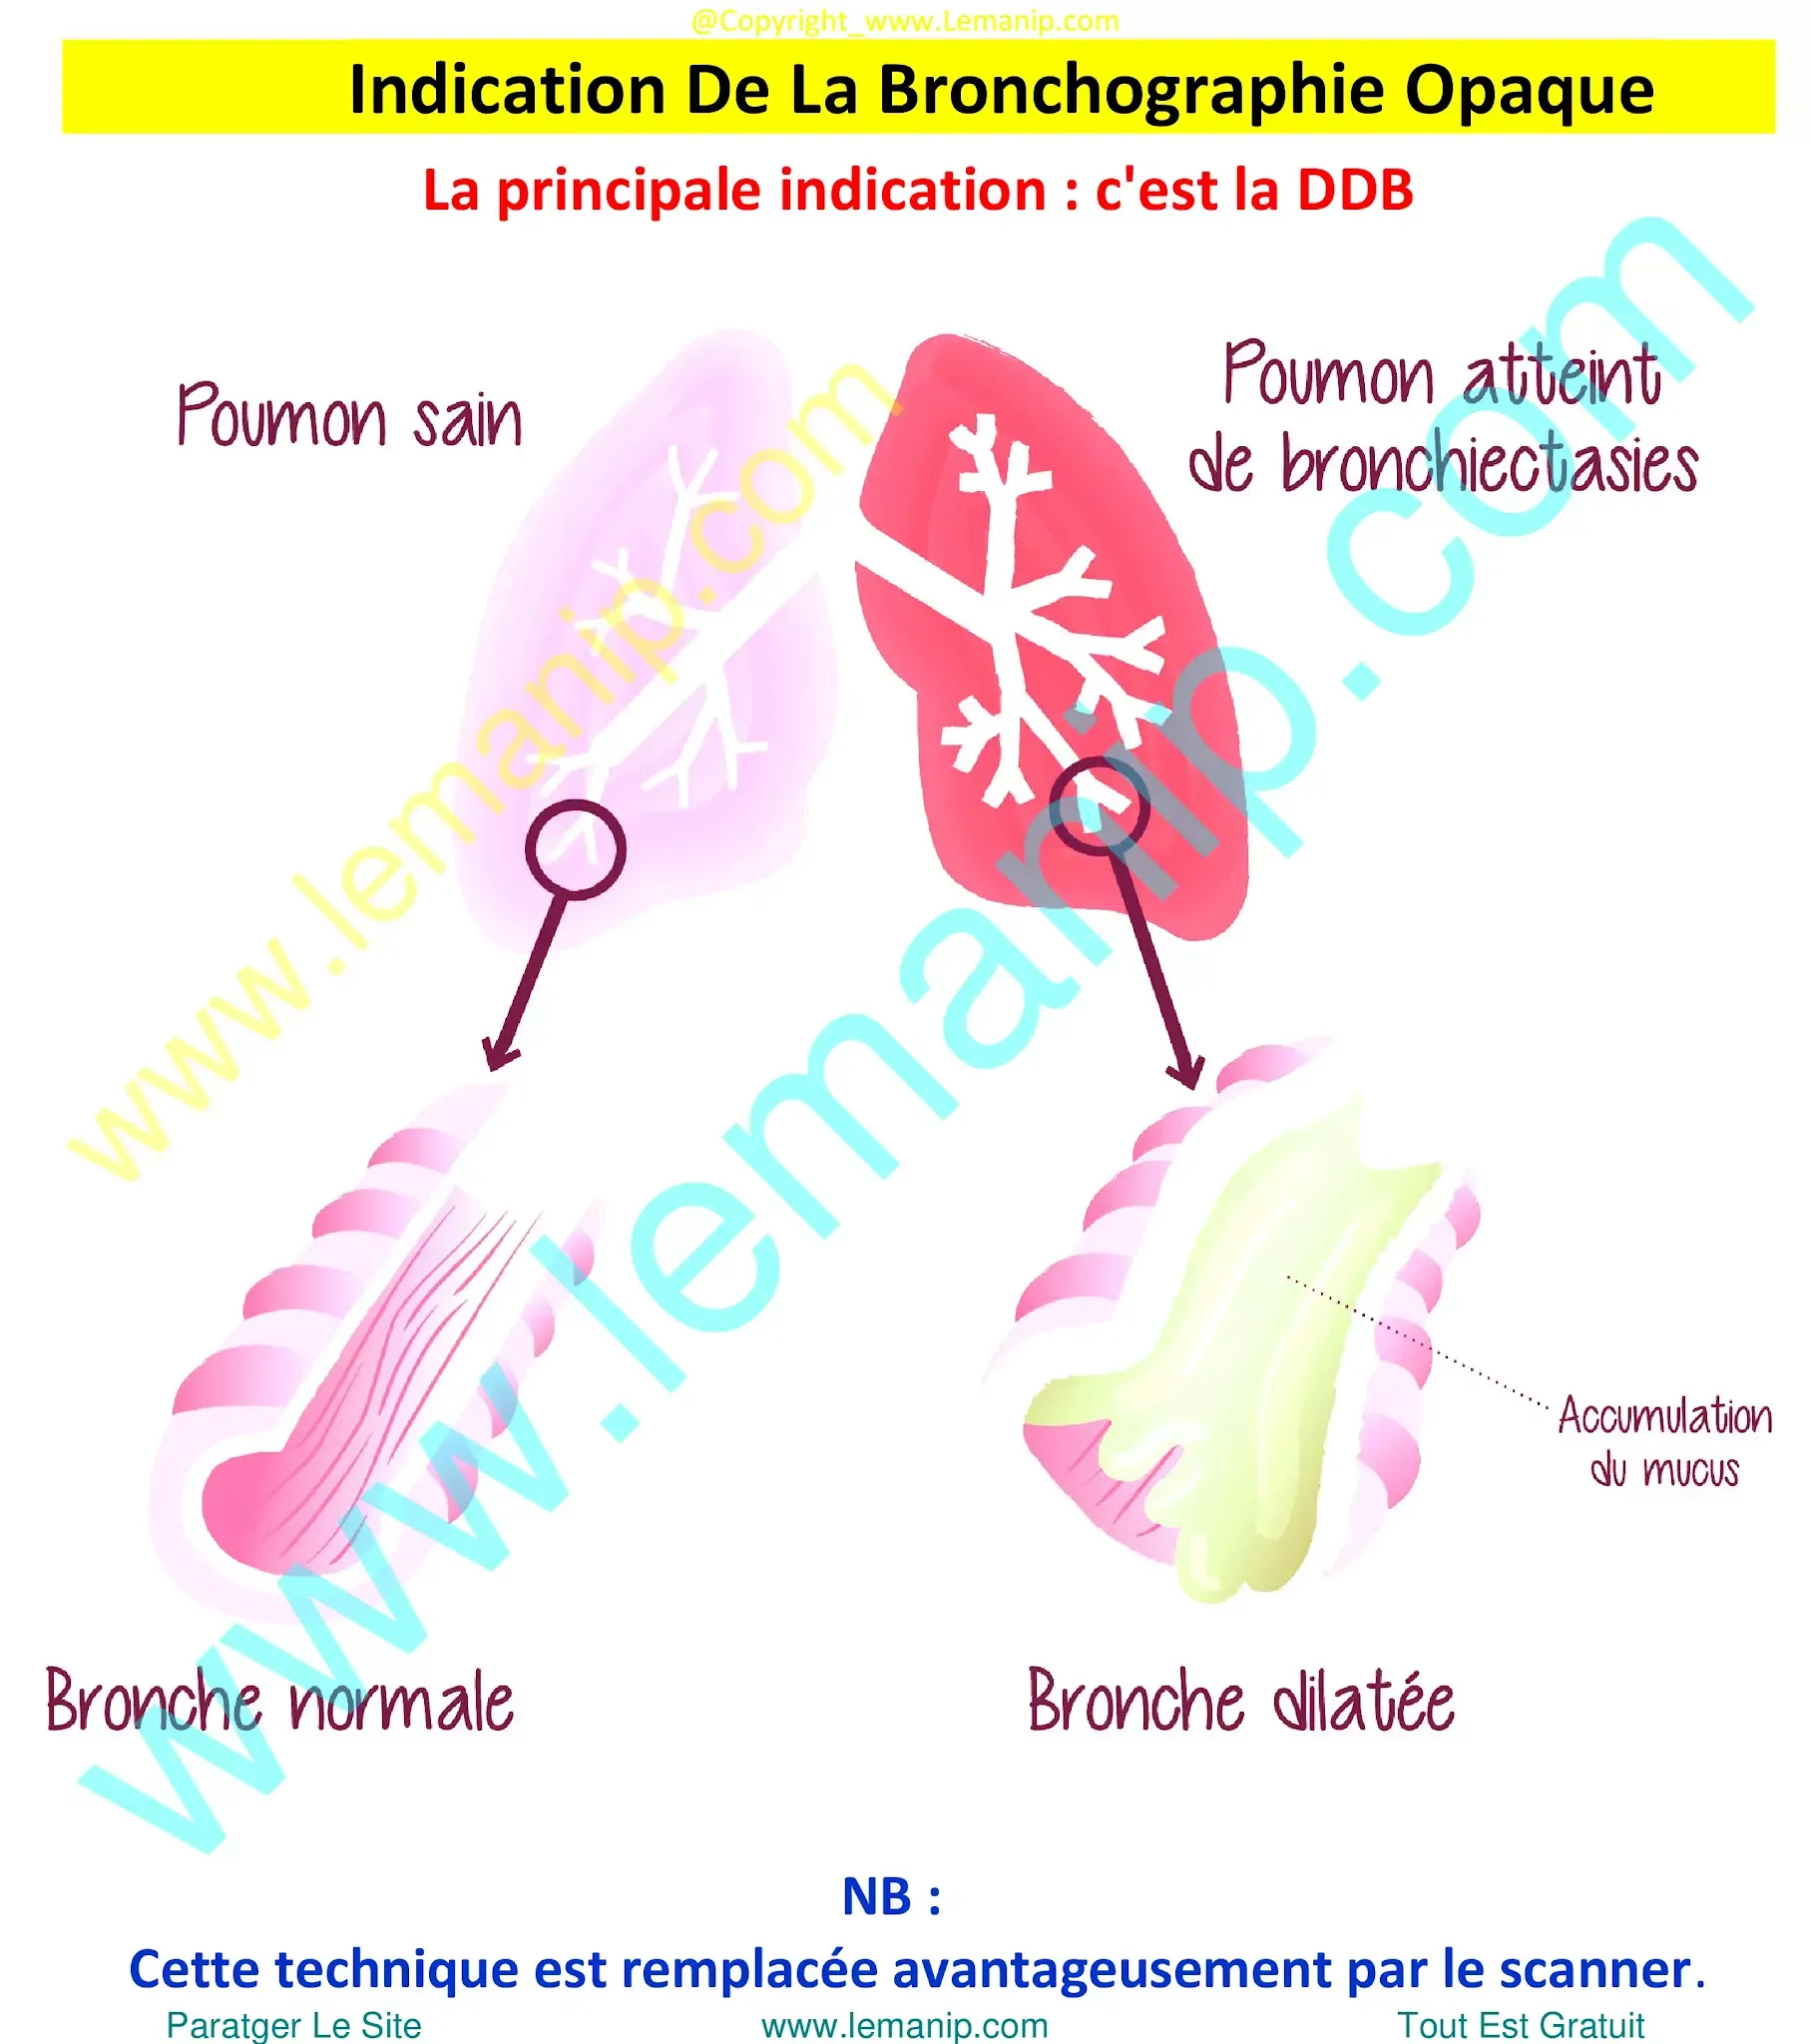 bronchoalveolar ca,lung lavage for copd,whole lung lavage,lung lavage,opdivo lung,restrictive airway disease,small airway disease,inflated lungs,hyperexpanded lungs,enlarged lungs